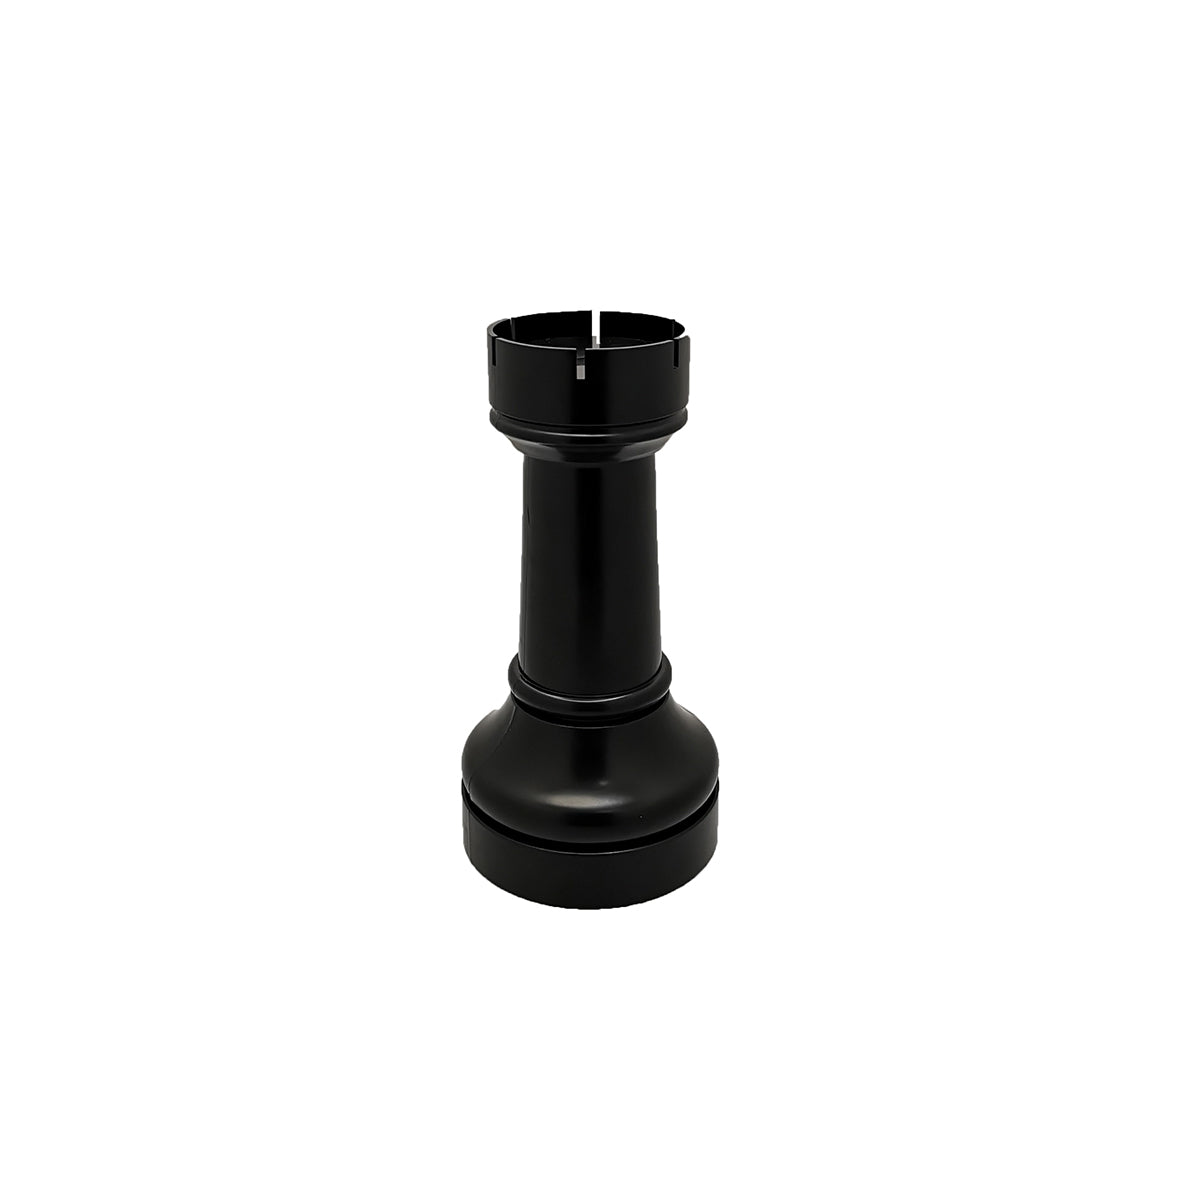 Giant Garden Chess 43cm Replacement Pieces Black Rook